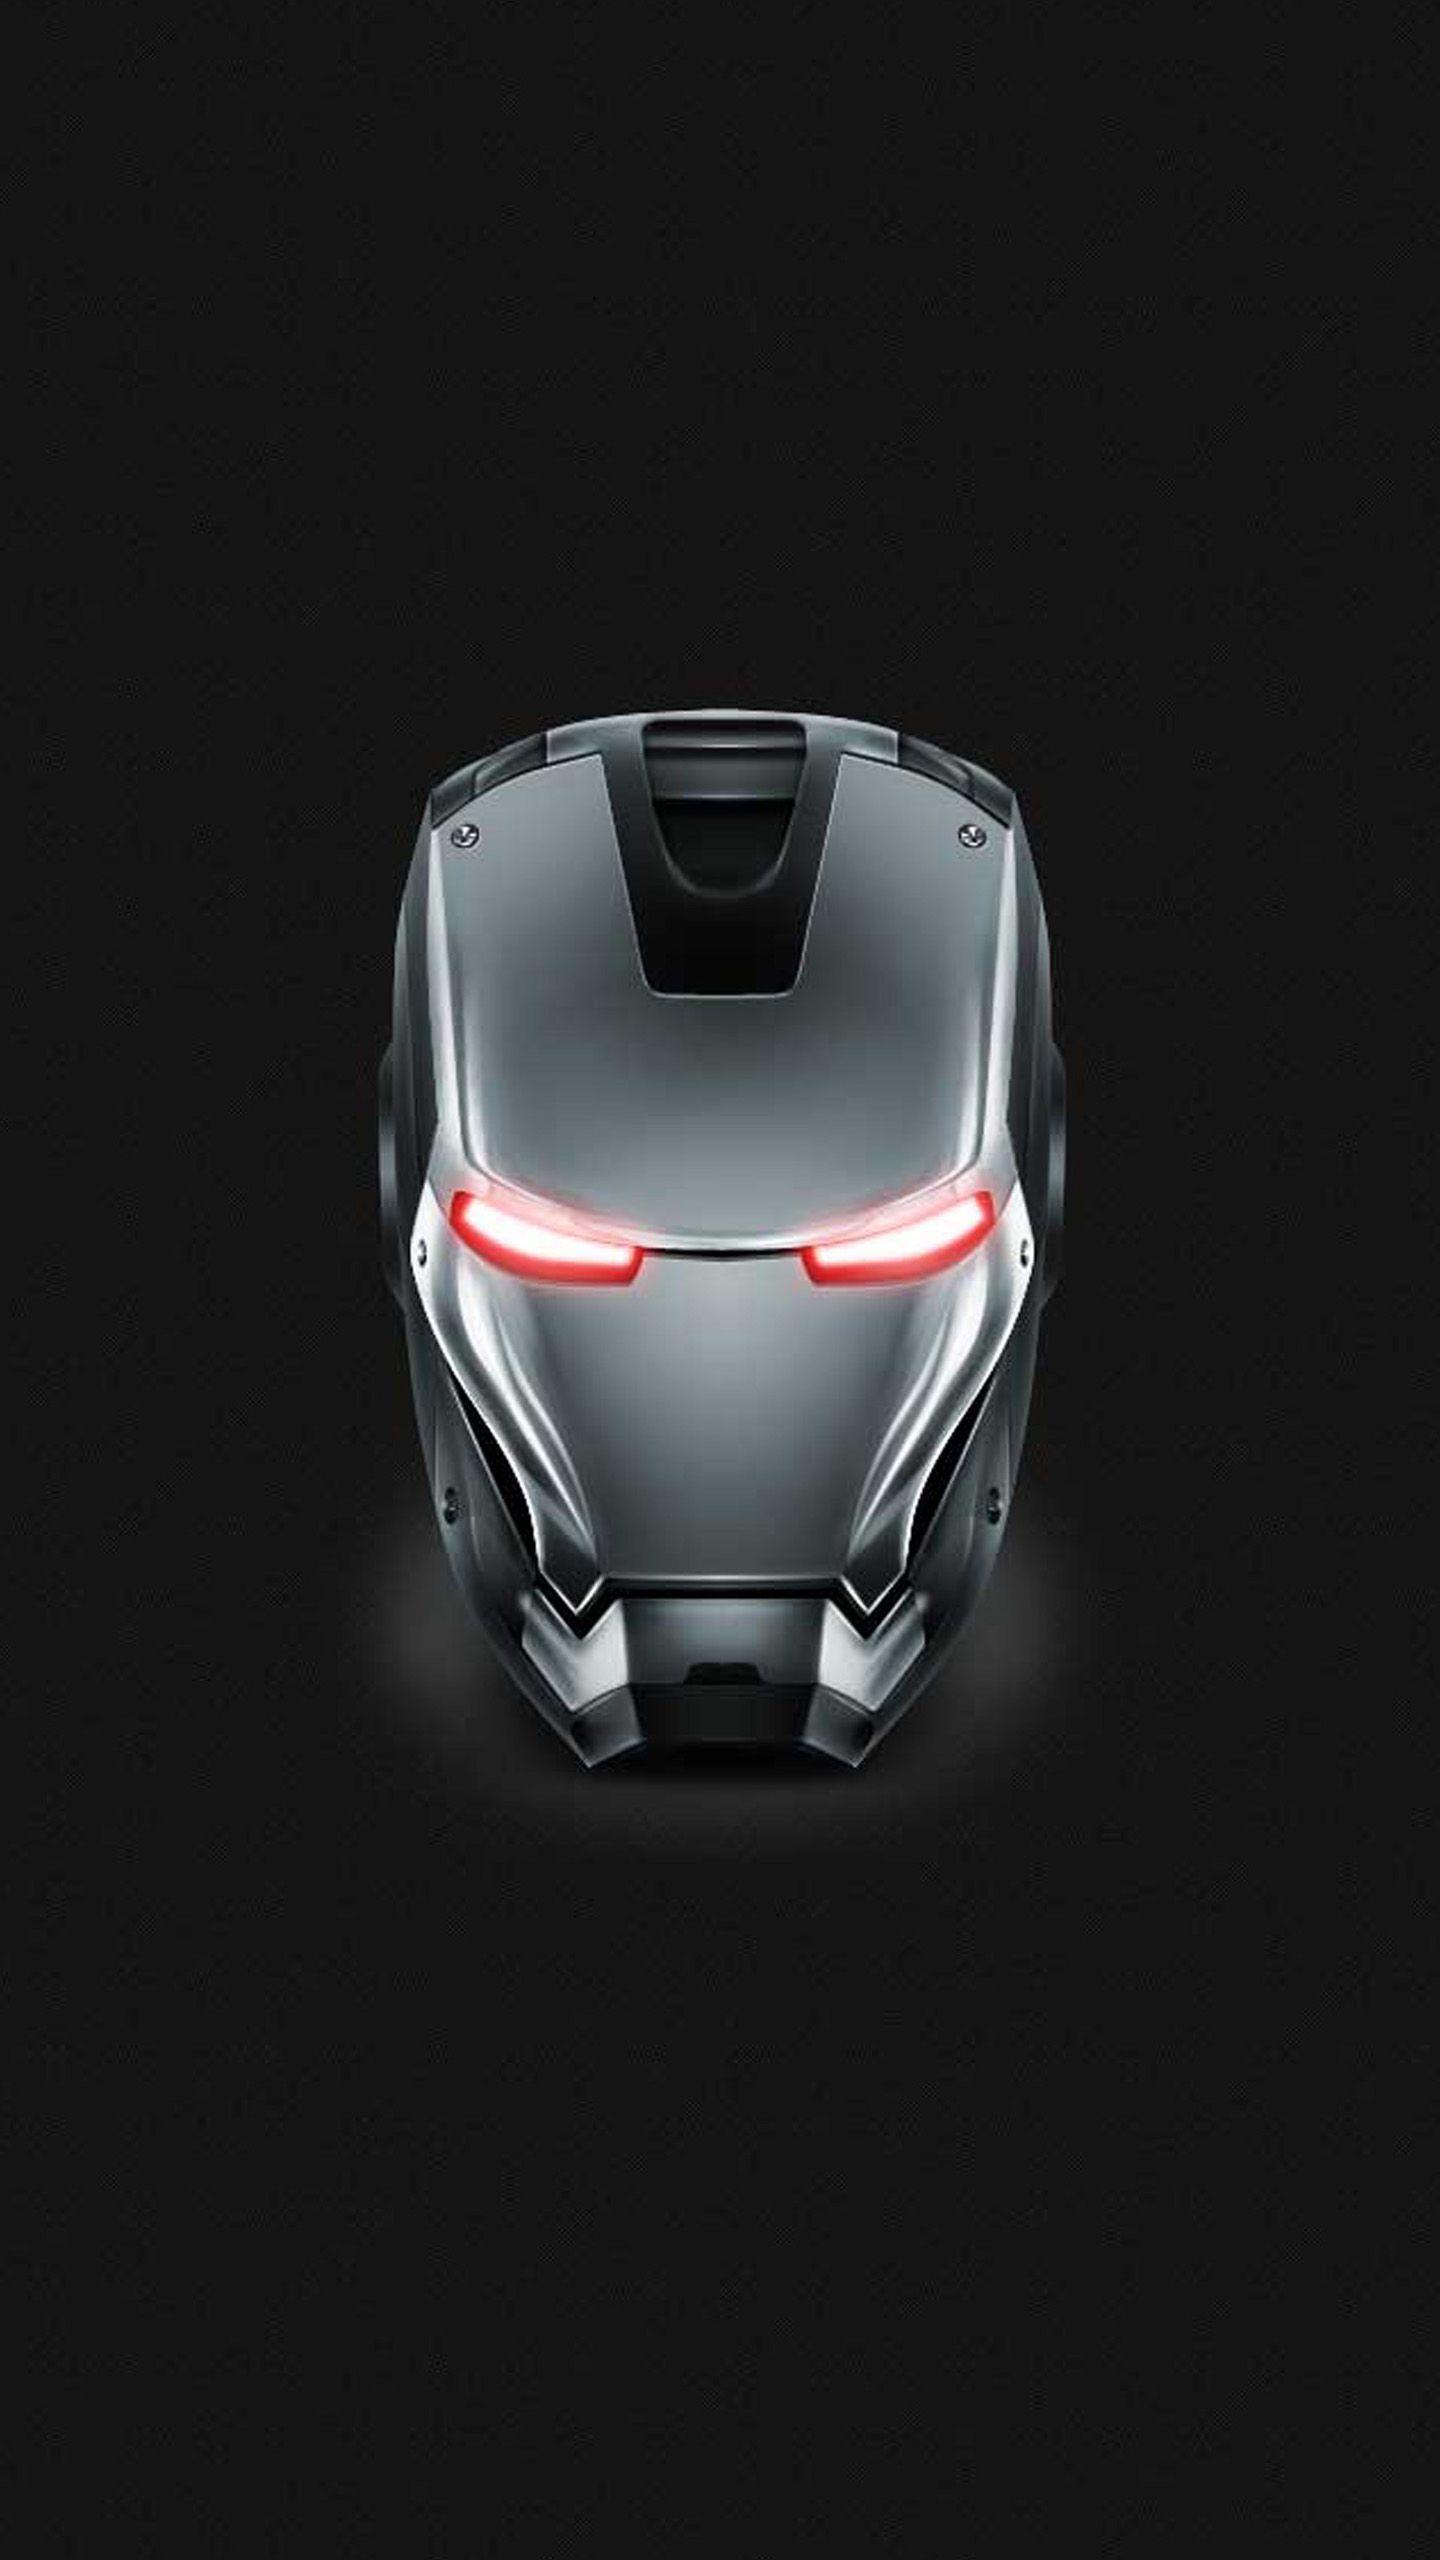 Iron Man Wallpaper For Android. (34++ Wallpaper)